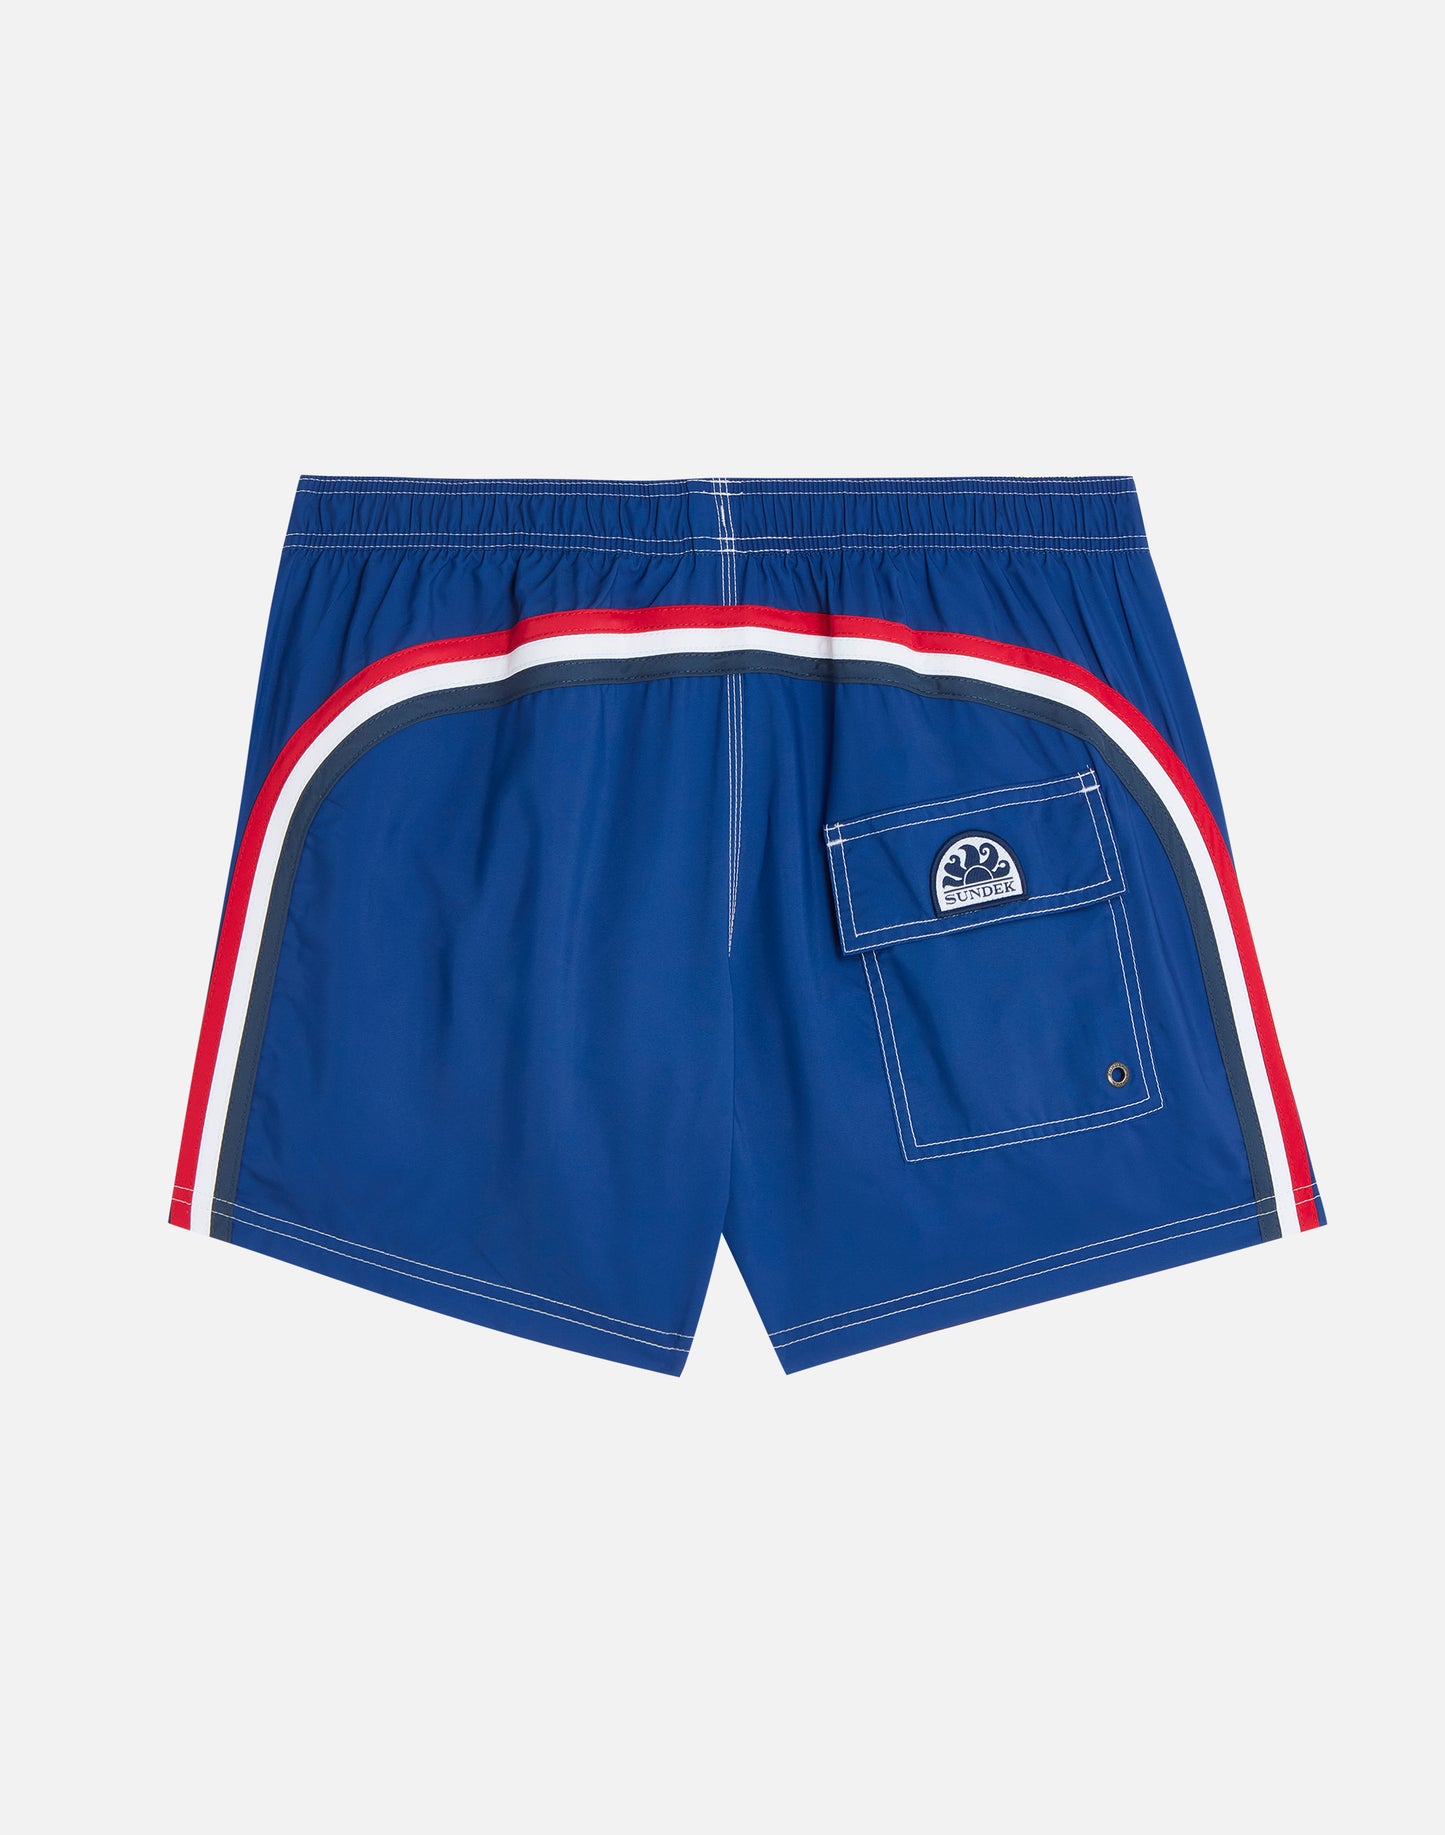 SHORT SWIM SHORTS WITH AN ELASTICATED WAISTBAND RECYCLED POLYESTER REPREVE® UNITED KINGDOM FLAG